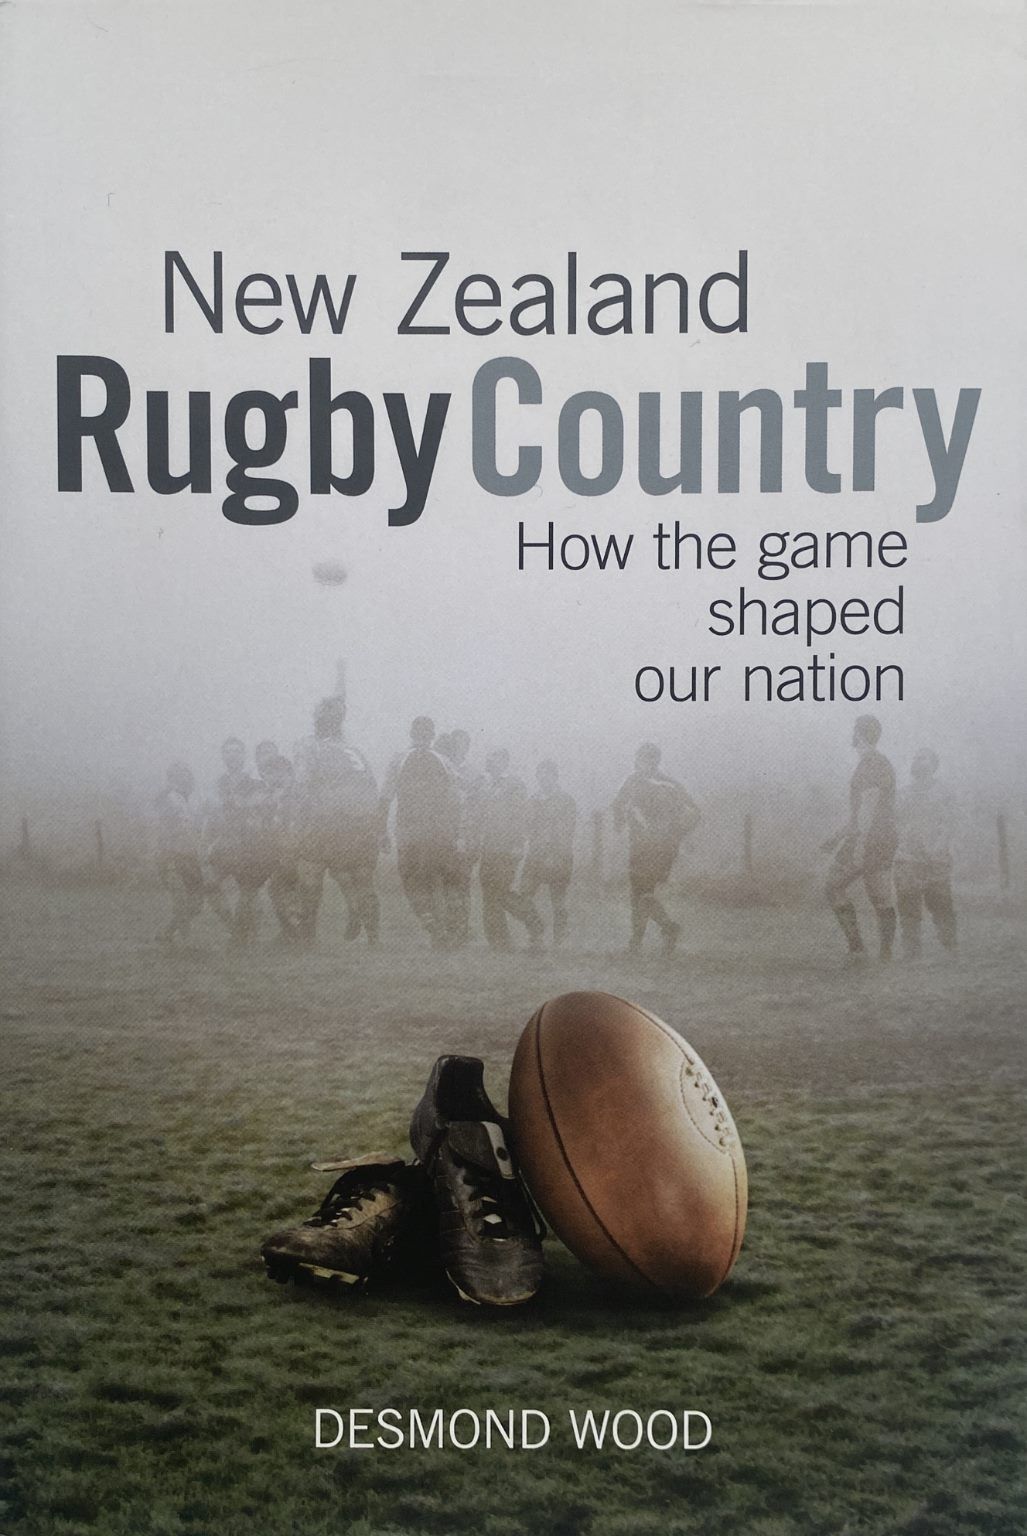 NEW ZEALAND RUGBY COUNTRY: How the Game shaped our Nation